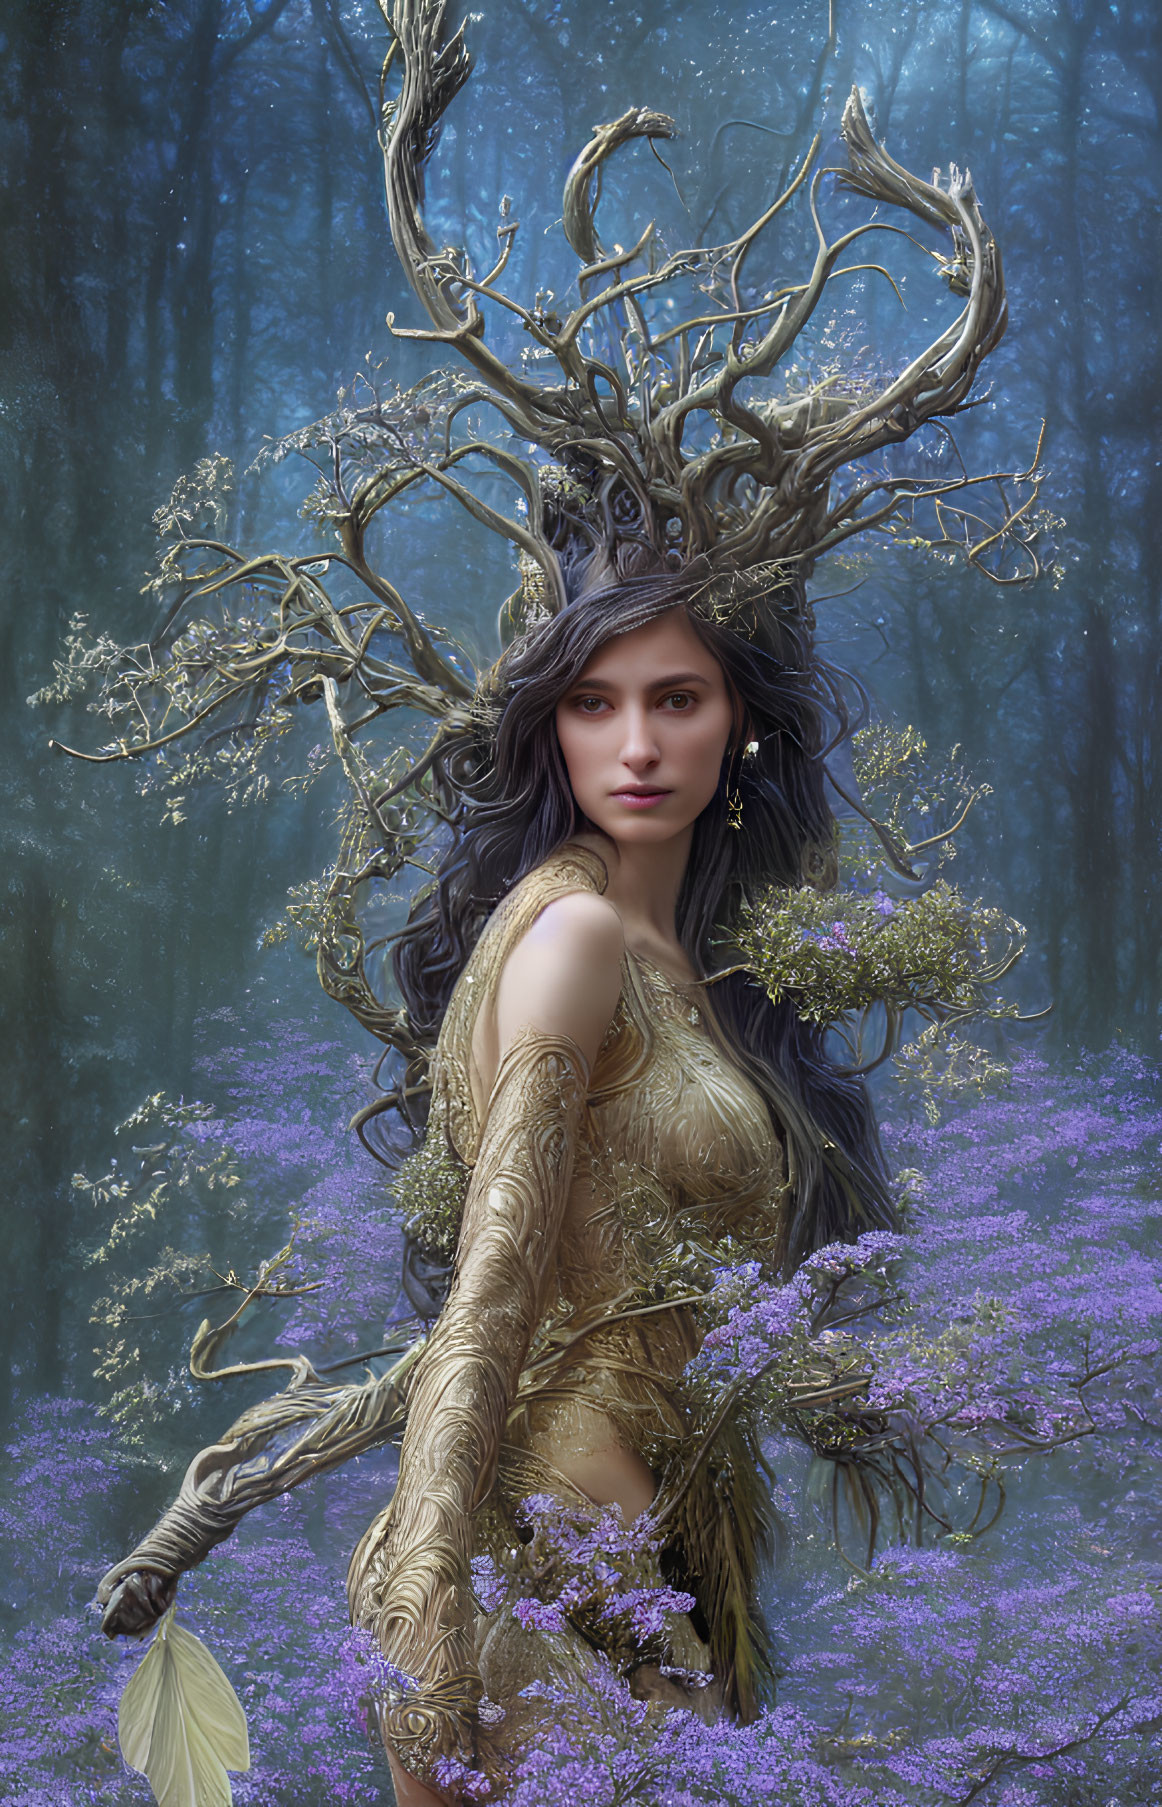 Digital artwork: Woman with antler-like headdress and golden tattoo patterns in mystical forest.